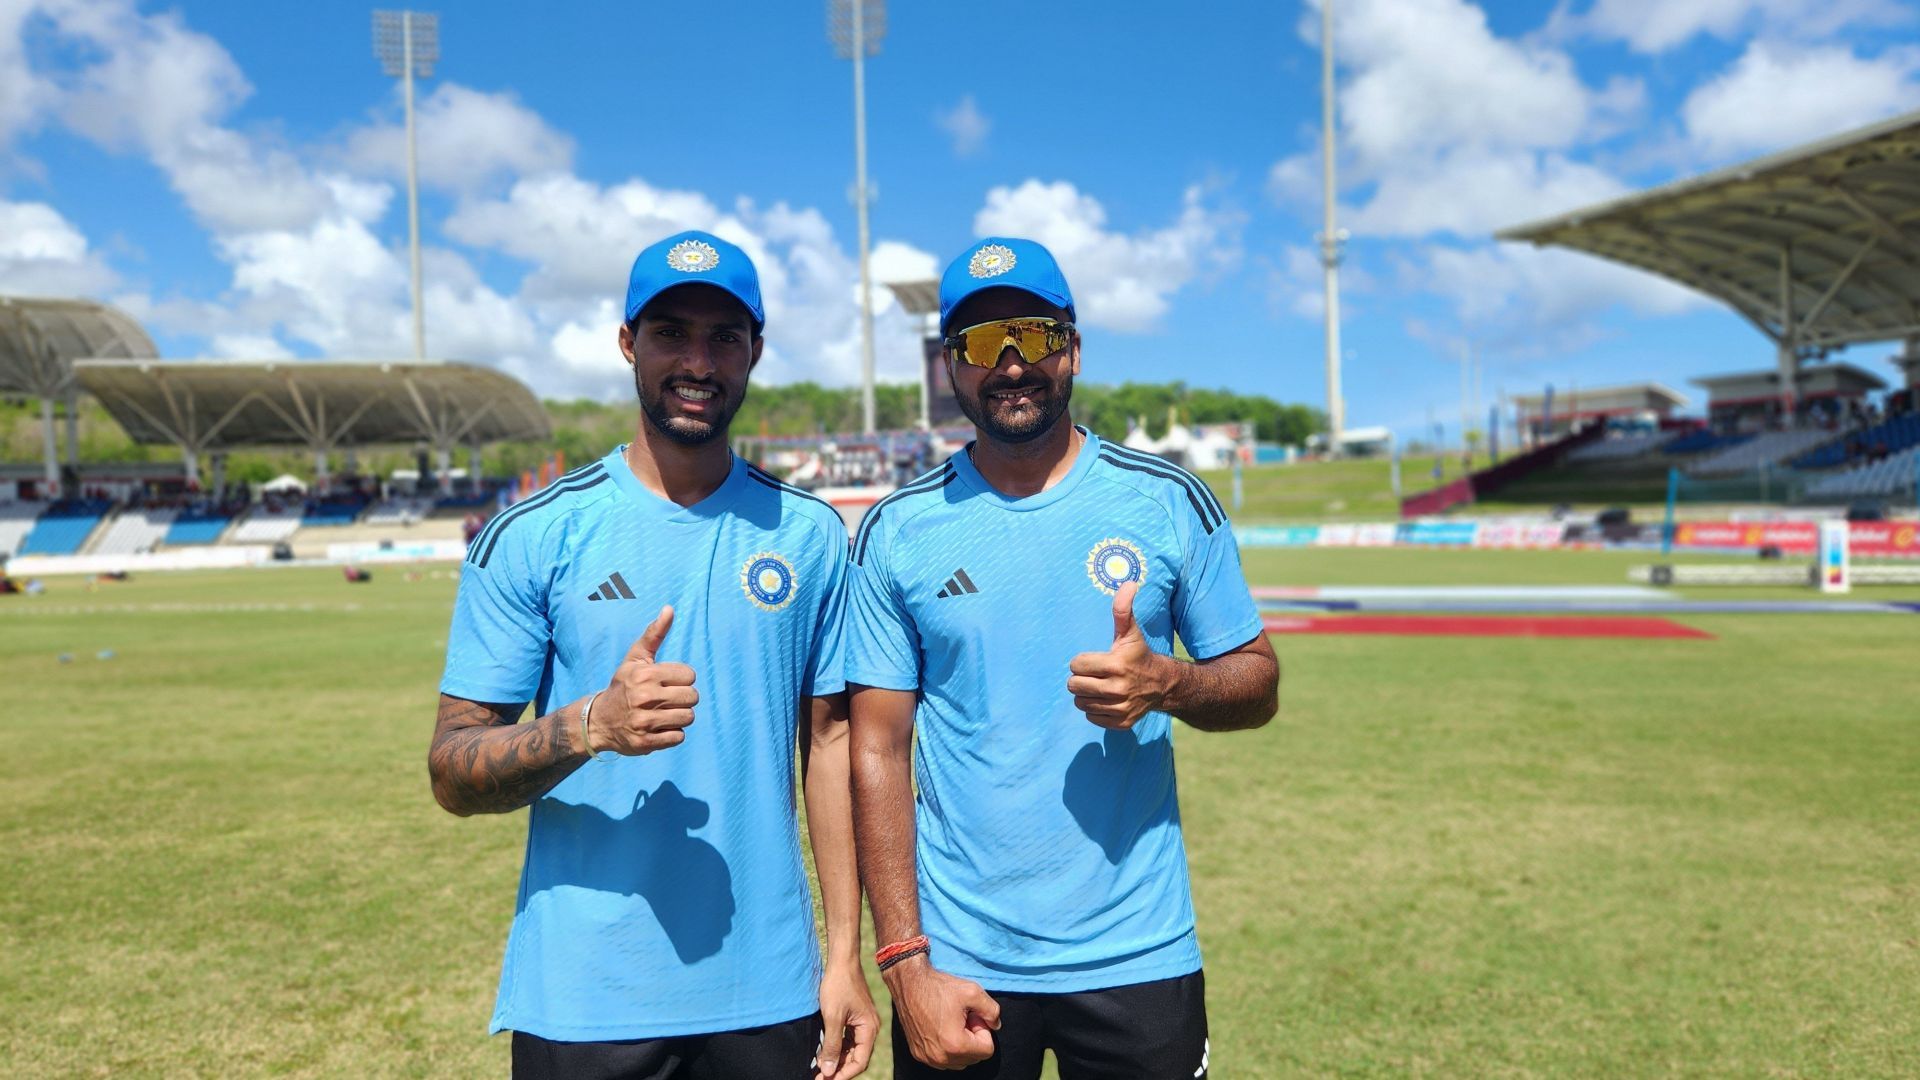 Mukesh Kumar [right] made his T20I debut in the previous game